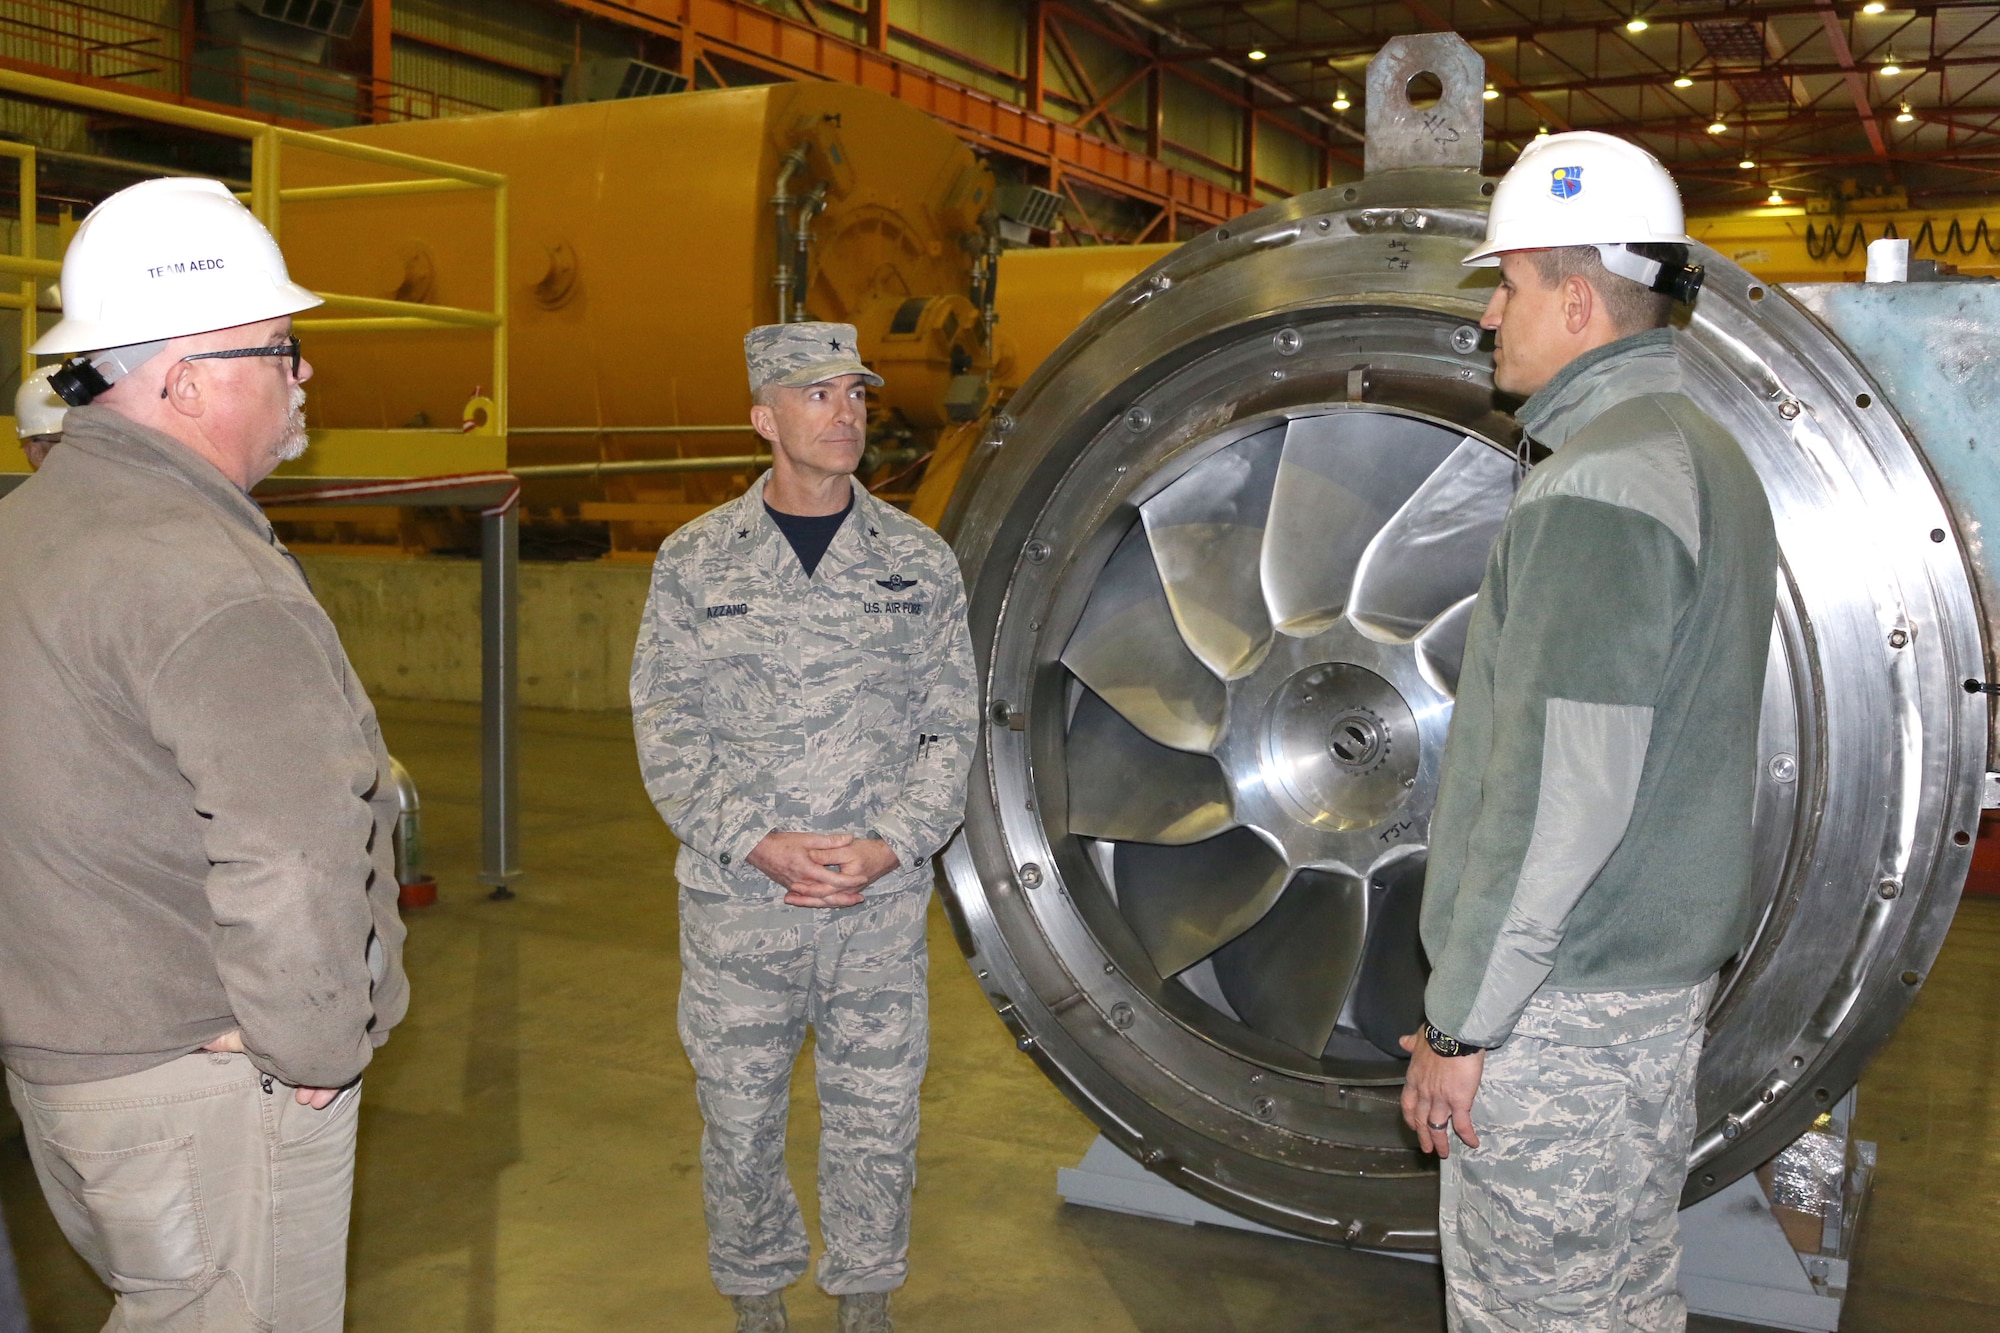 Lt. Col. David Garay, director of the Aeropropulsion Combined Test Force at Arnold Air Force Base, right, discusses some of the equipment found within the Aeropropulsion Systems Test Facility with Brig. Gen. Christopher Azzano, commander of the Air Force Test Center, center. Pictured at left is ASTF Asset Manager Jimmy Steele. Azzano and other AFTC leadership visited Arnold Air Force Base in mid-November to take part in the 2018 AFTC Strategic Offsite, Azzano’s first offsite since assuming the role of AFTC commander in August. (U.S. Air Force photo by Brad Hicks)